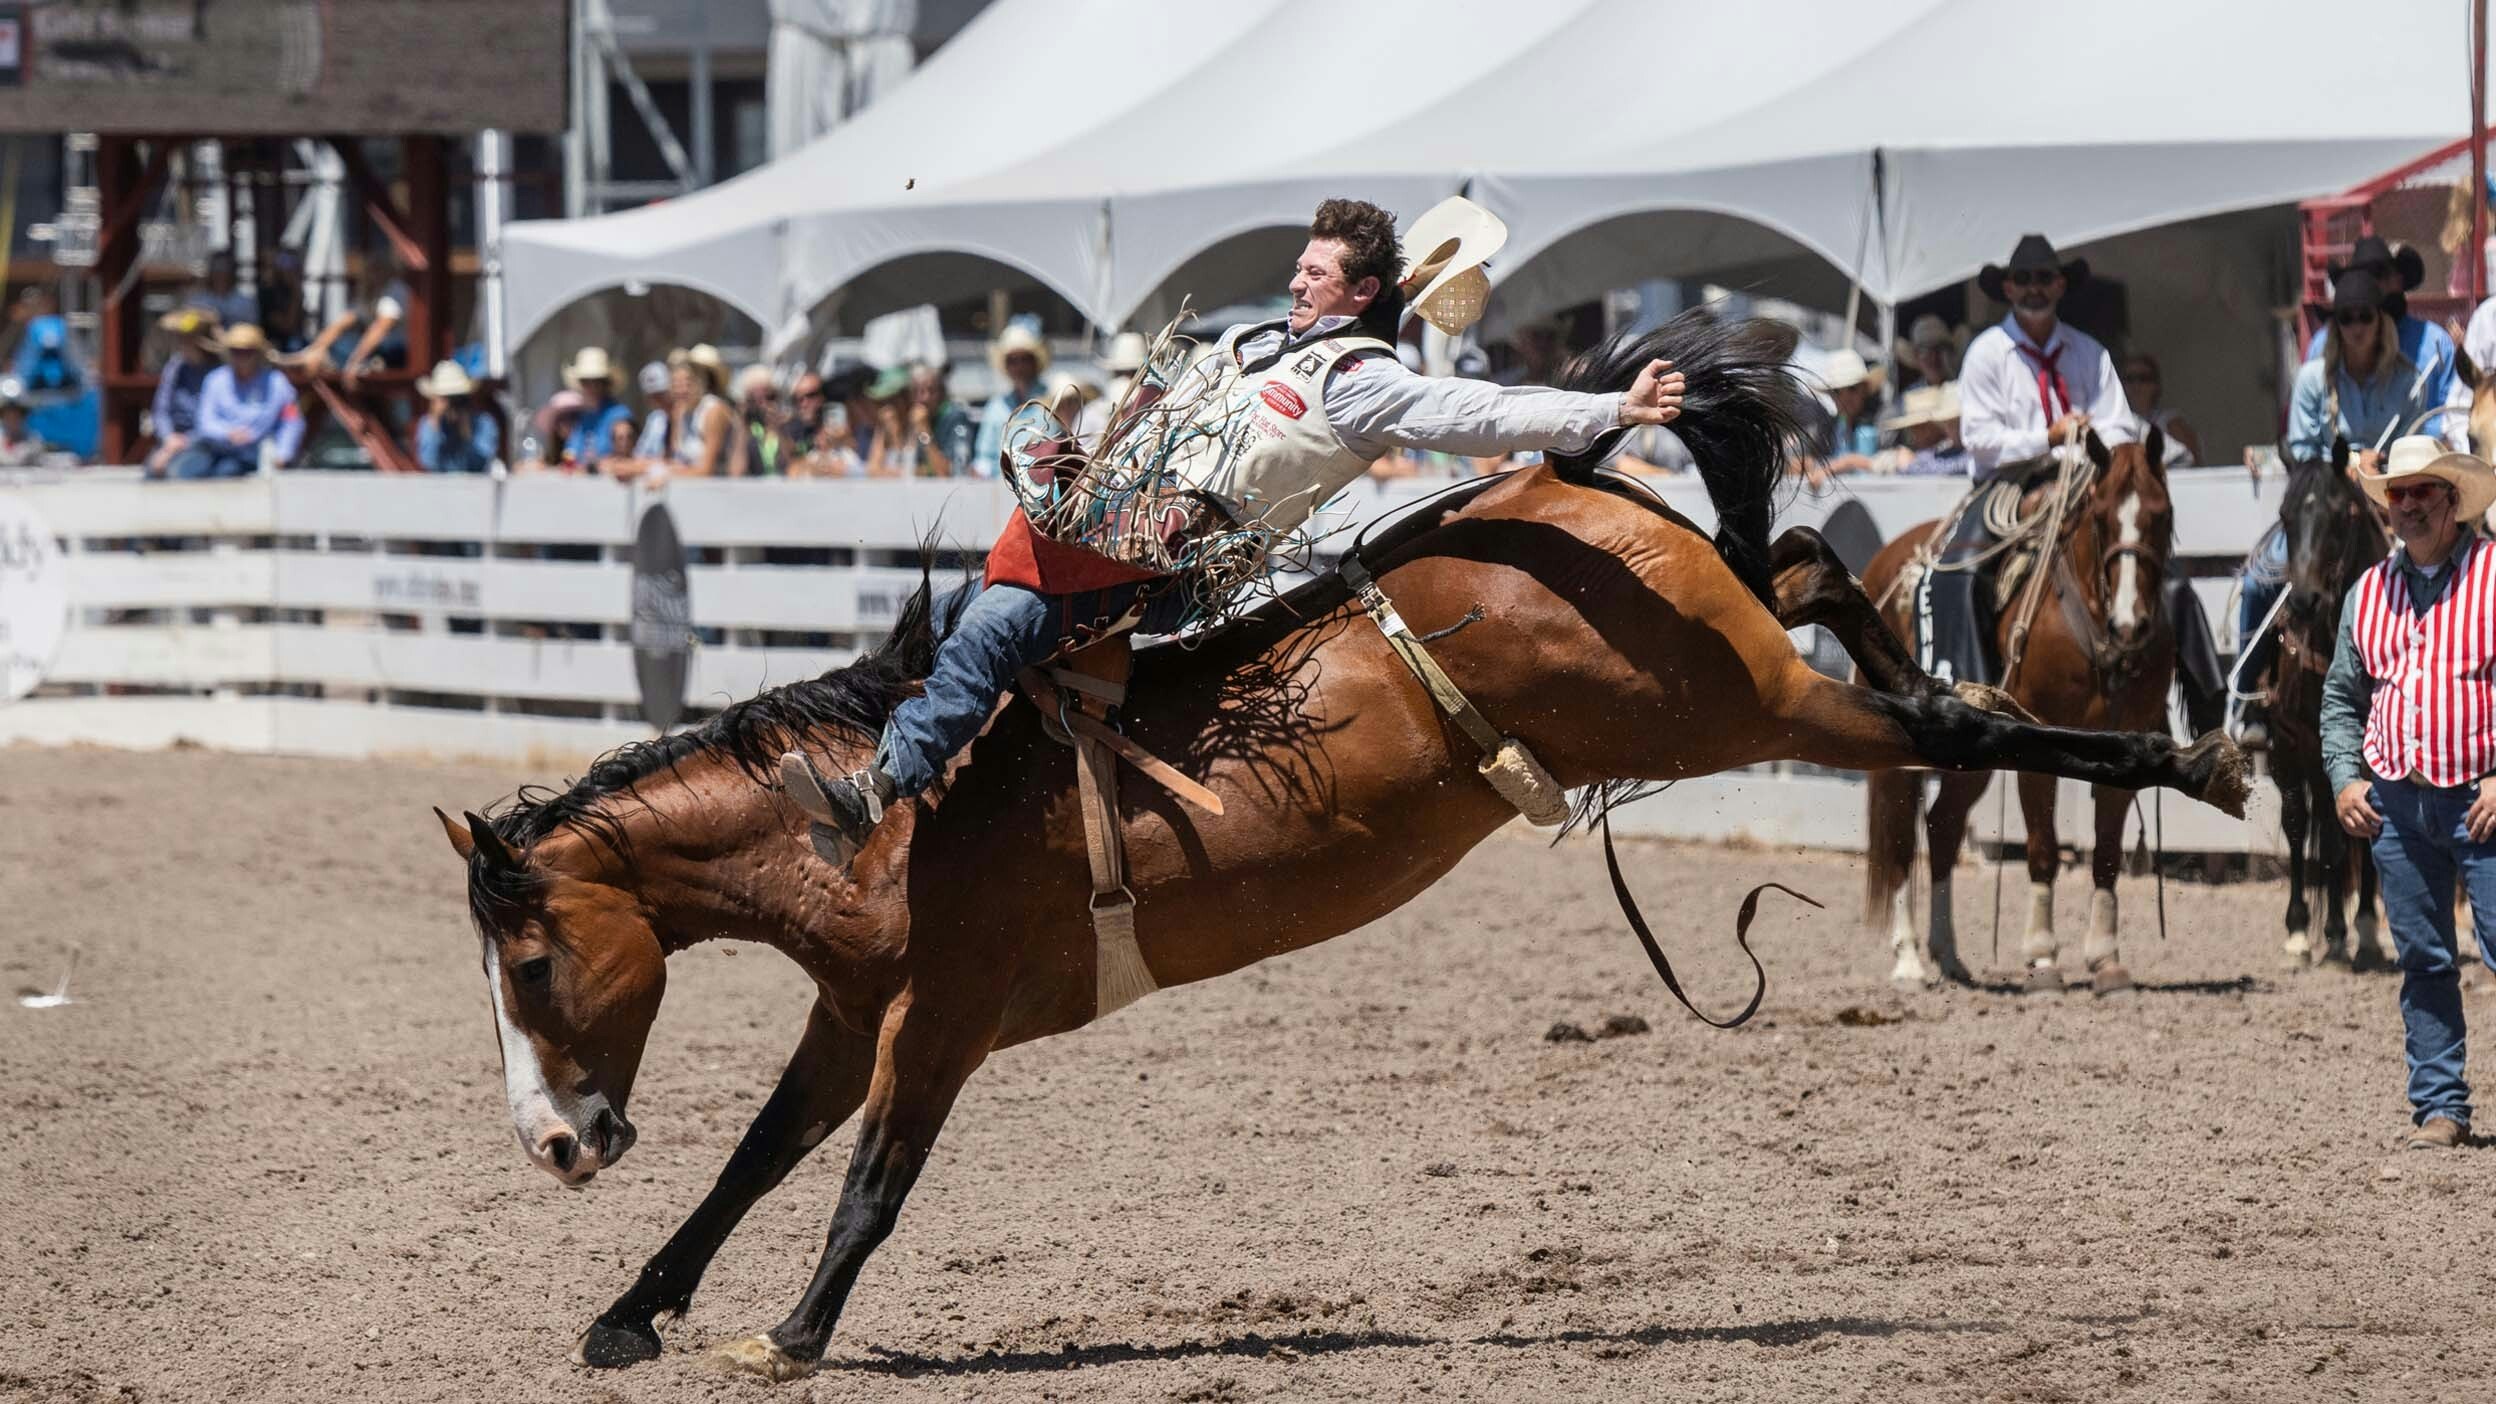 Kade Sonnier from Carencro, LA rides for a score of 87.50 in the Bareback Riding at Cheyenne Frontier Days on July 30, 2023. Kade won the CFD Championship in a 3 way tie with Cole Reiner and Clayton Biglow.